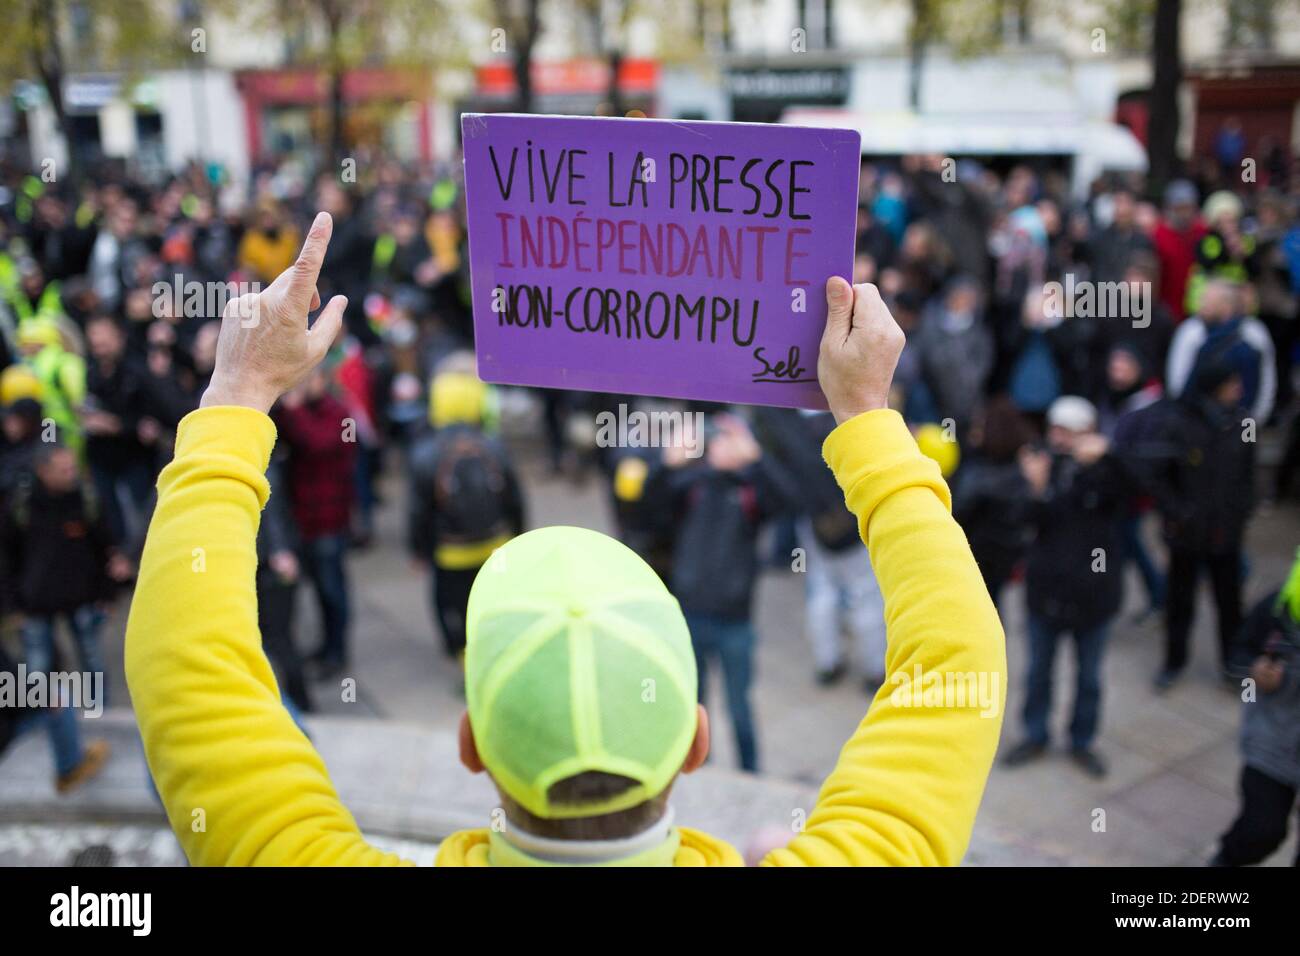 Yellow Vest ( gilet jaune ) holind a sign live the free press non corrupted  ( Vive la presse independante non corrompue ) on the fontaine des innocents  near Les Halles in